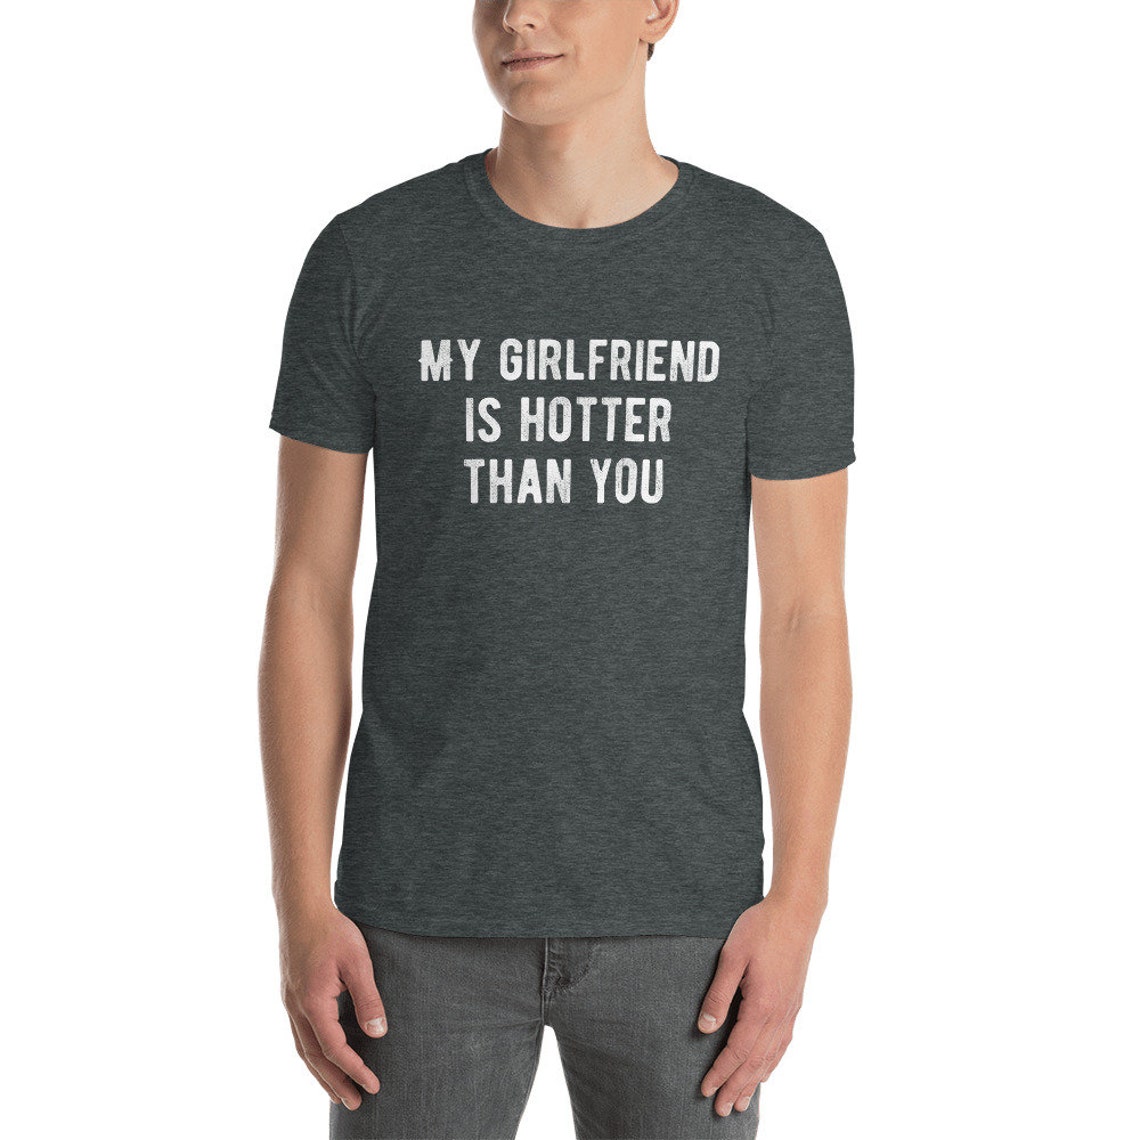 My girlfriend is hotter than you Unisex T-Shirt My | Etsy